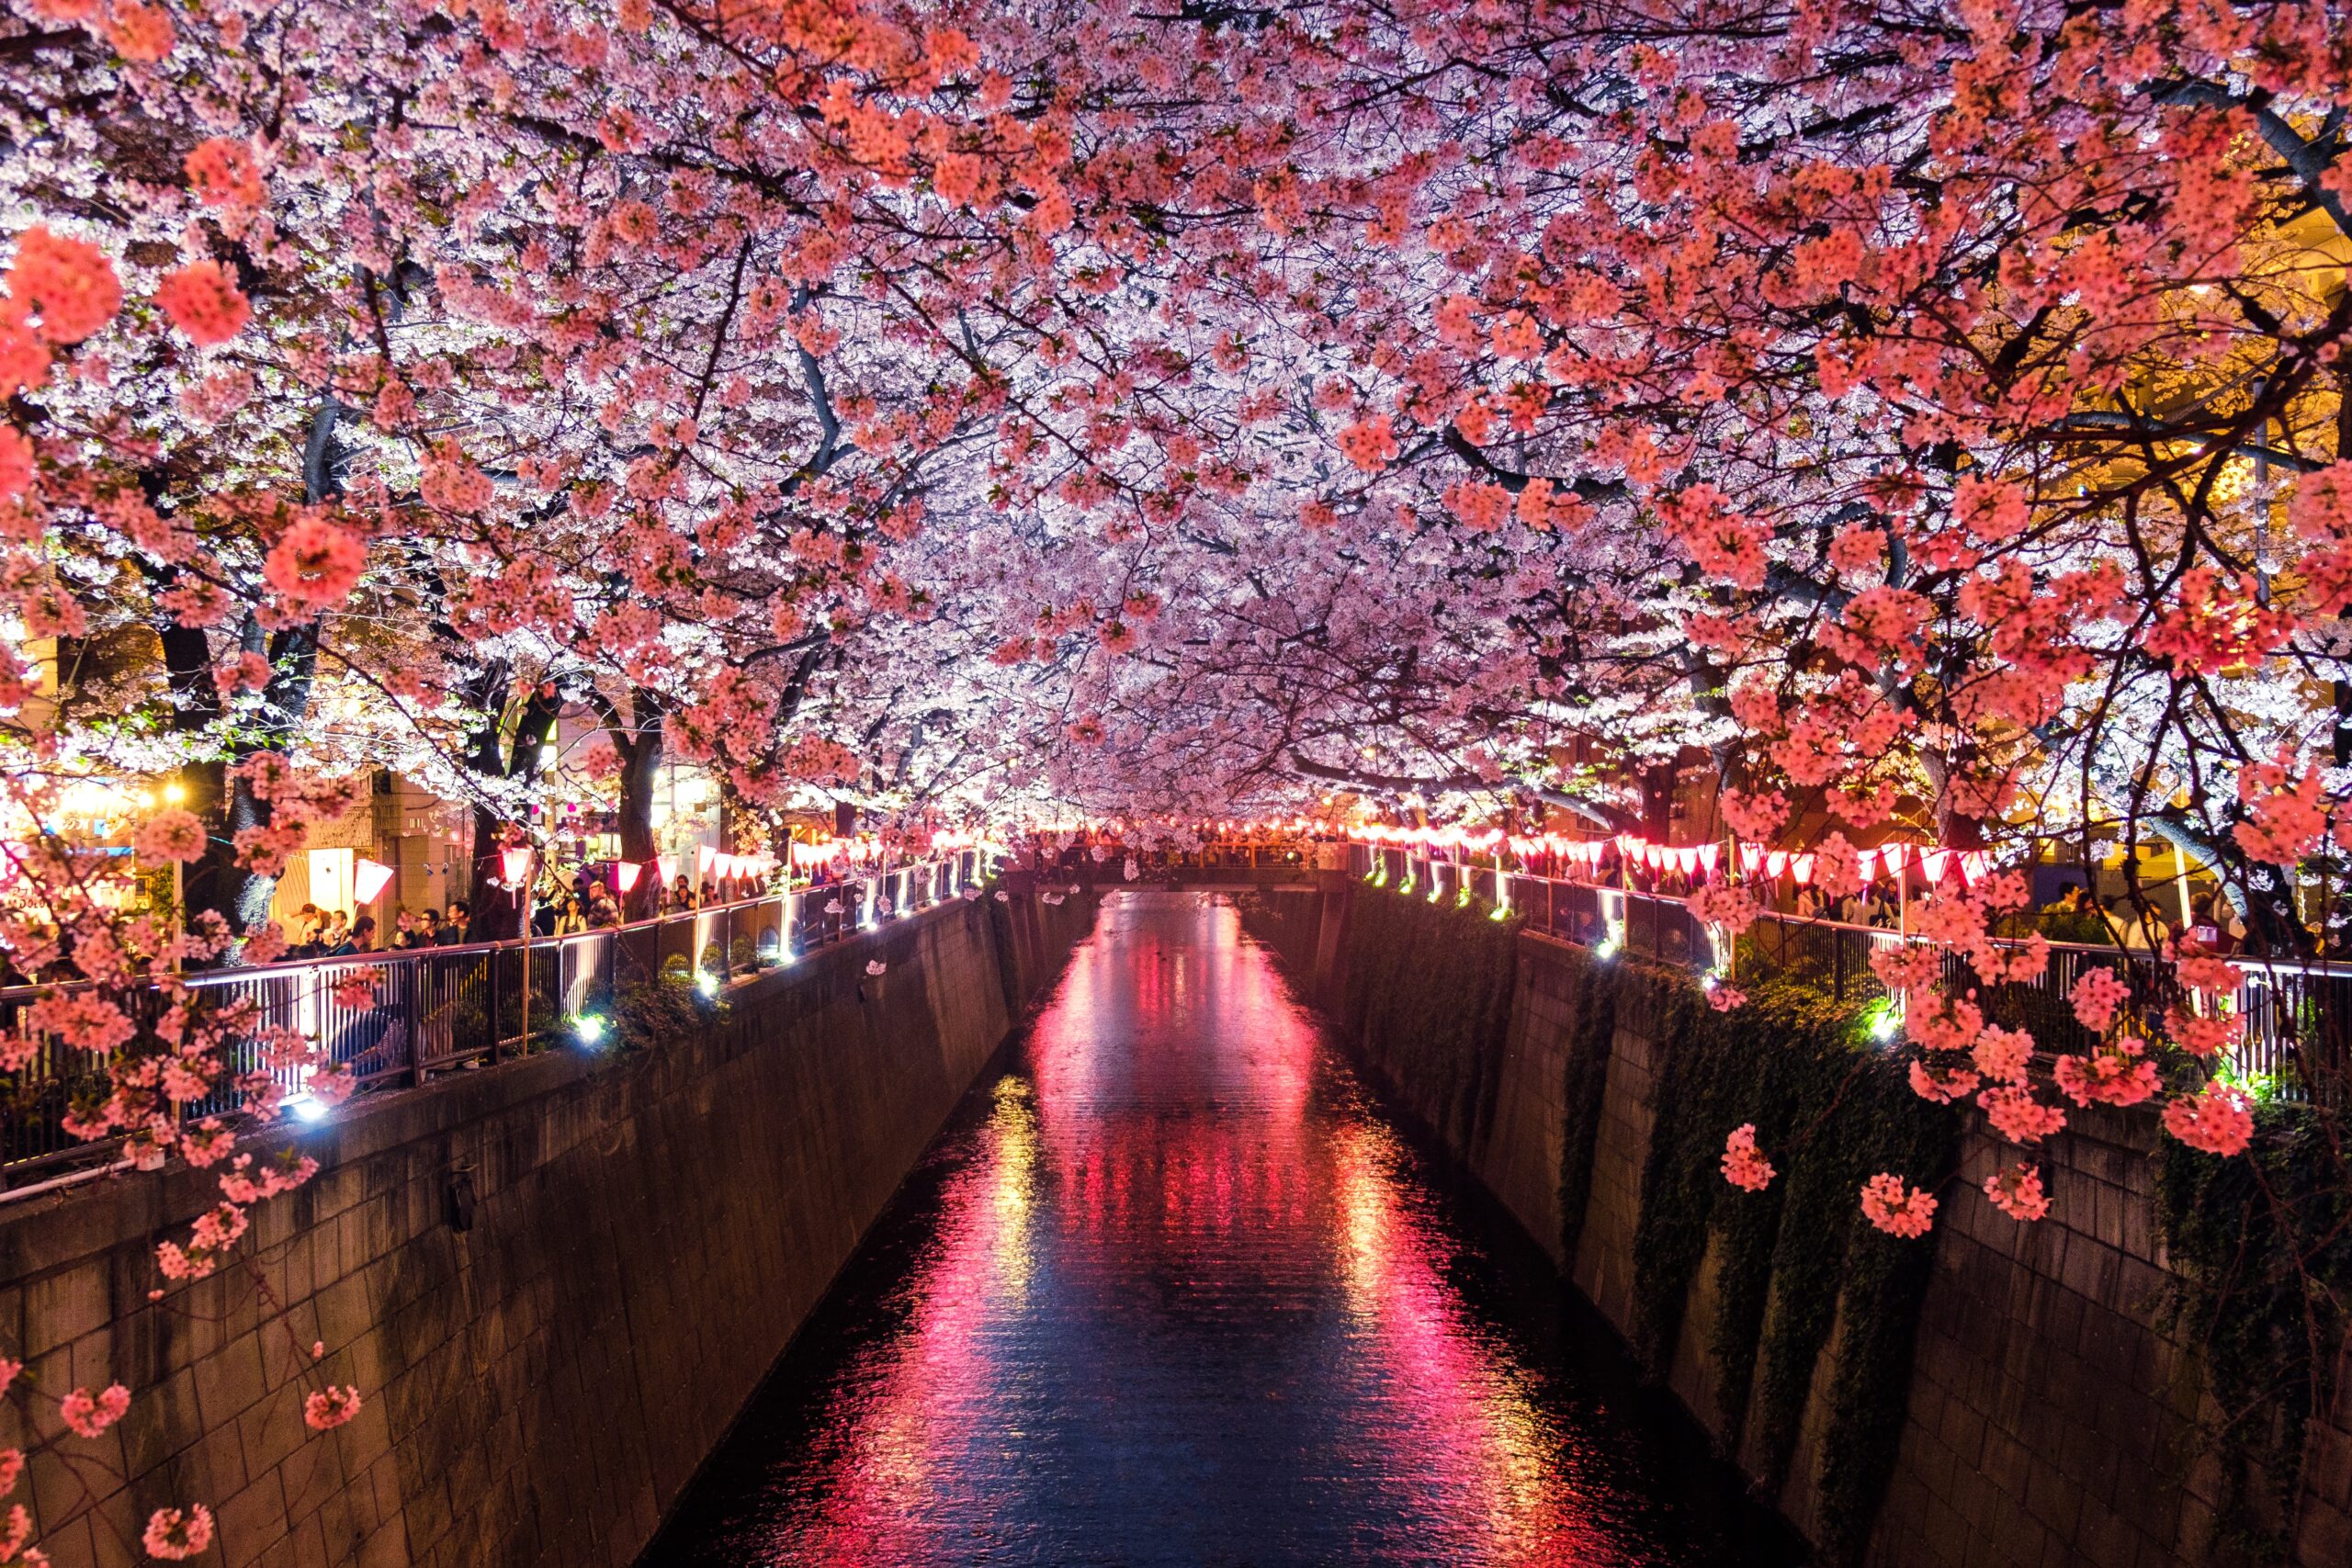 There are many grand celebrations of sakura in Japan, learn about the best options for tourists.
pictured: A canopy of sakura with many visitors appreciating the pink cherry blossoms 